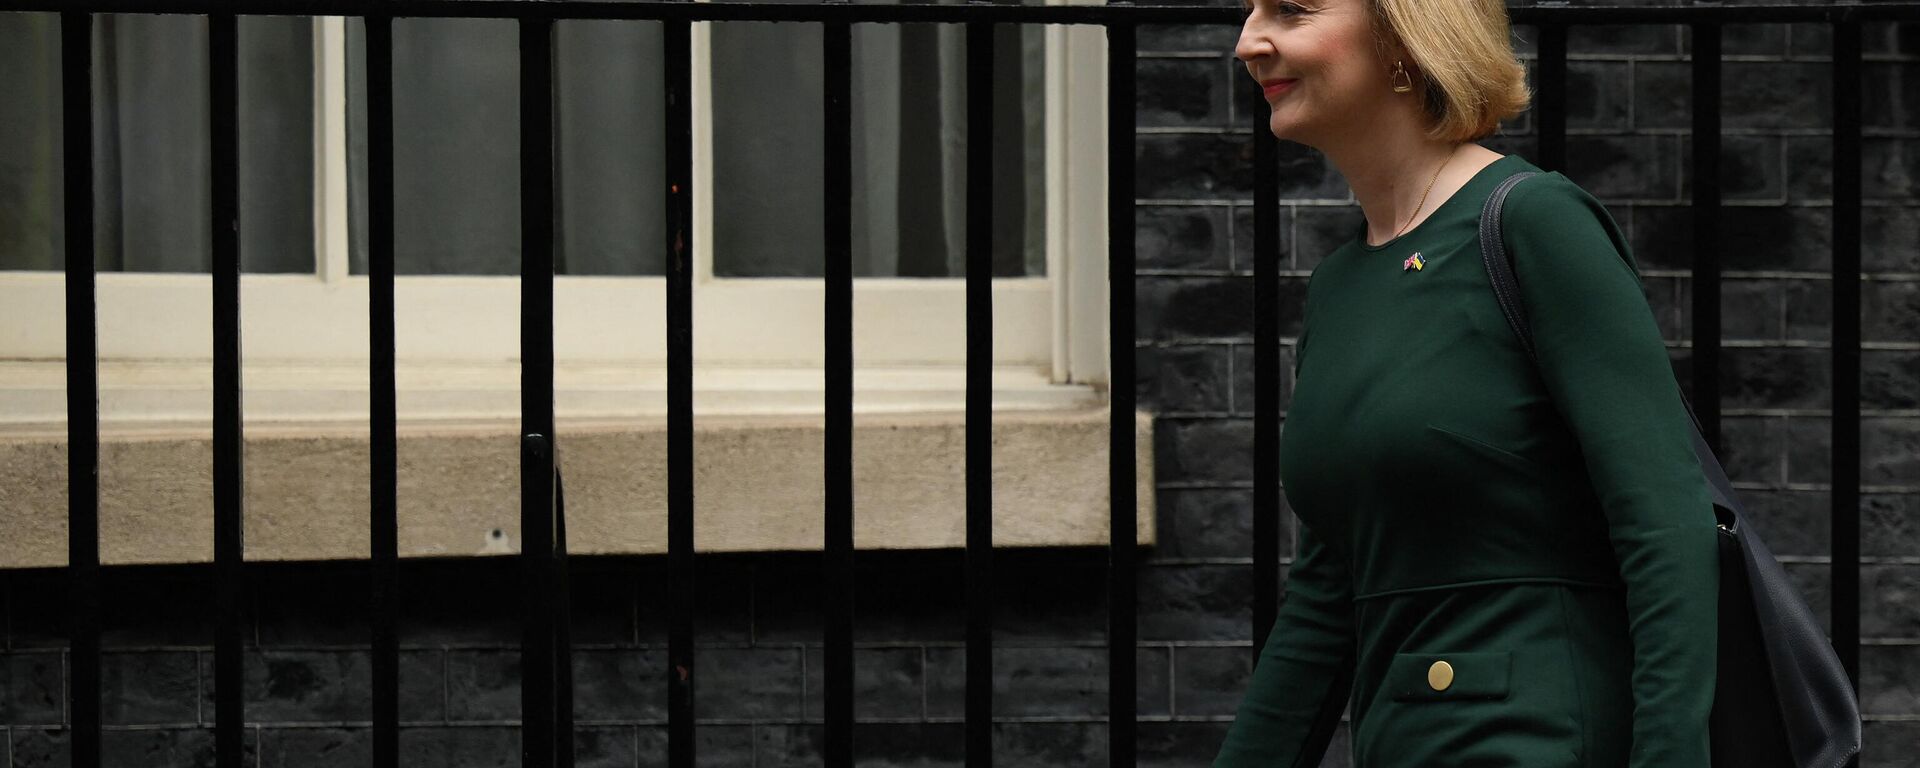 Britain's Prime Minister Liz Truss leaves the 10 Downing Street, in London, for the House of Commons to announce her energy price plan, on September 8, 2022 - Sputnik International, 1920, 21.09.2022